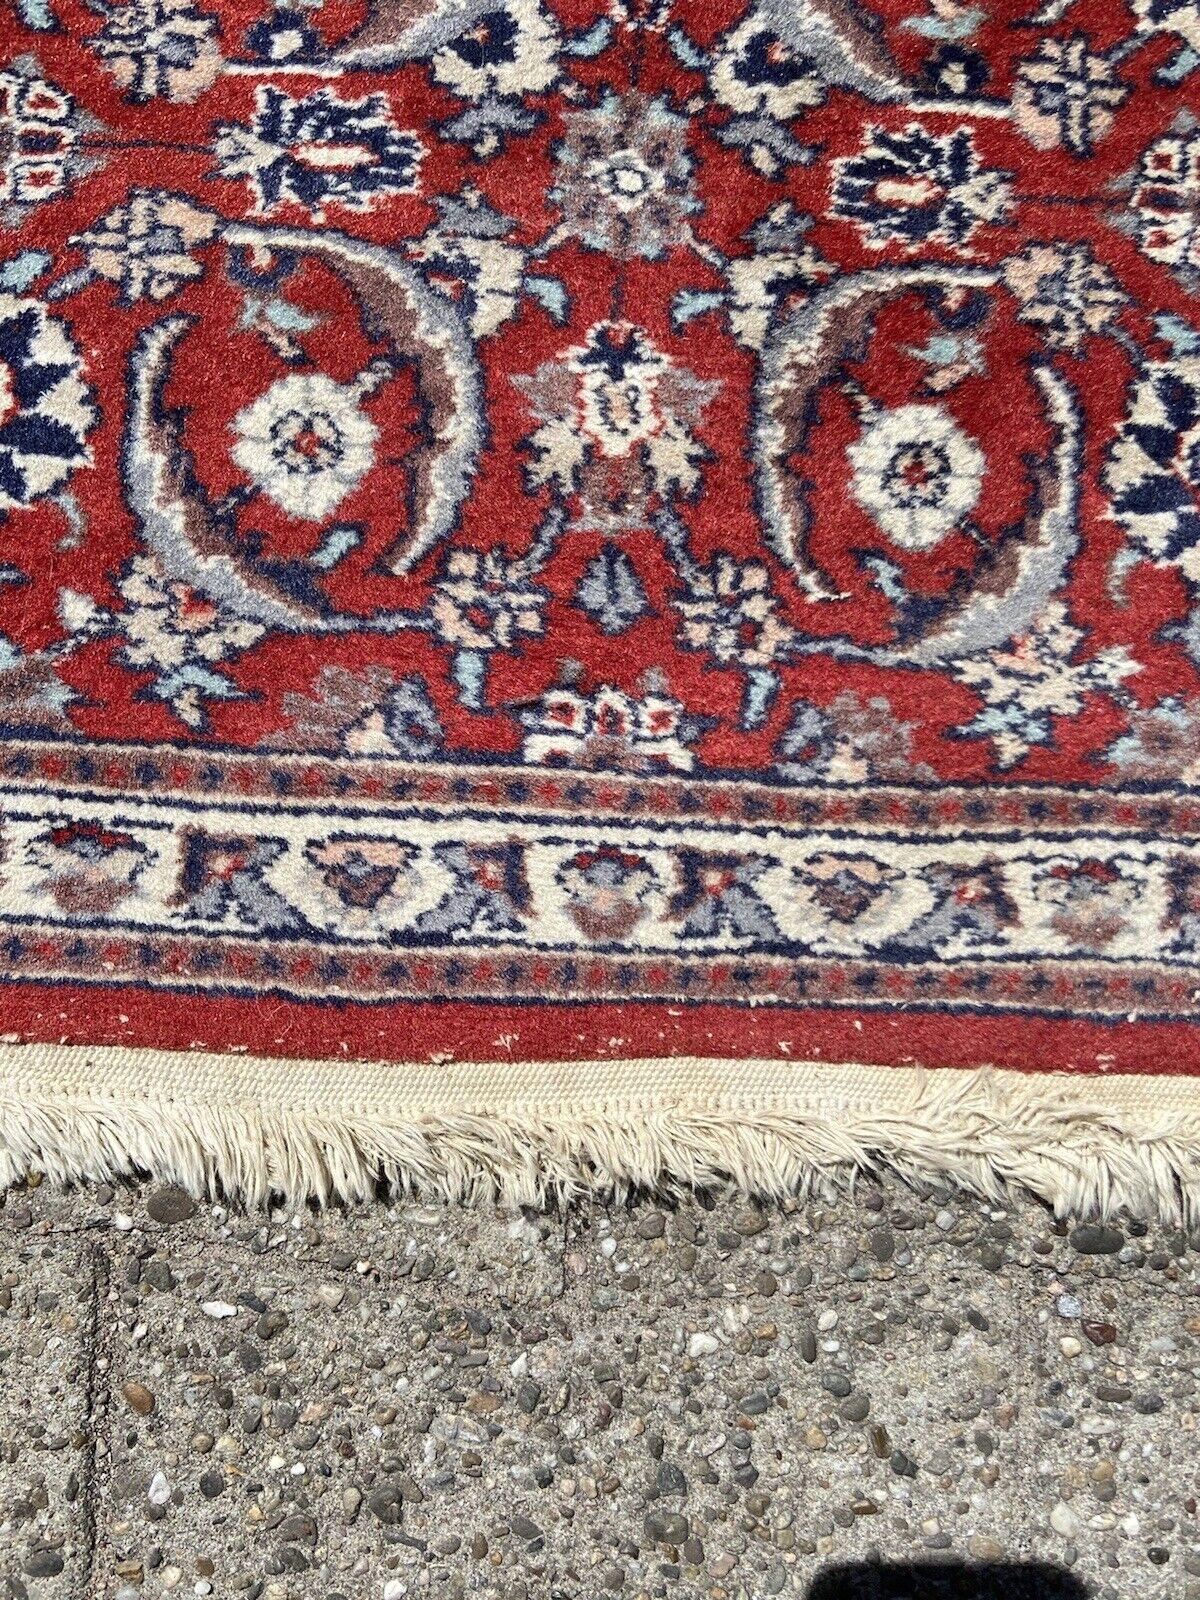 Handmade Vintage Persian Style Kashan Rug 1.5' x 3.7', 1970s - 1S21 For Sale 1